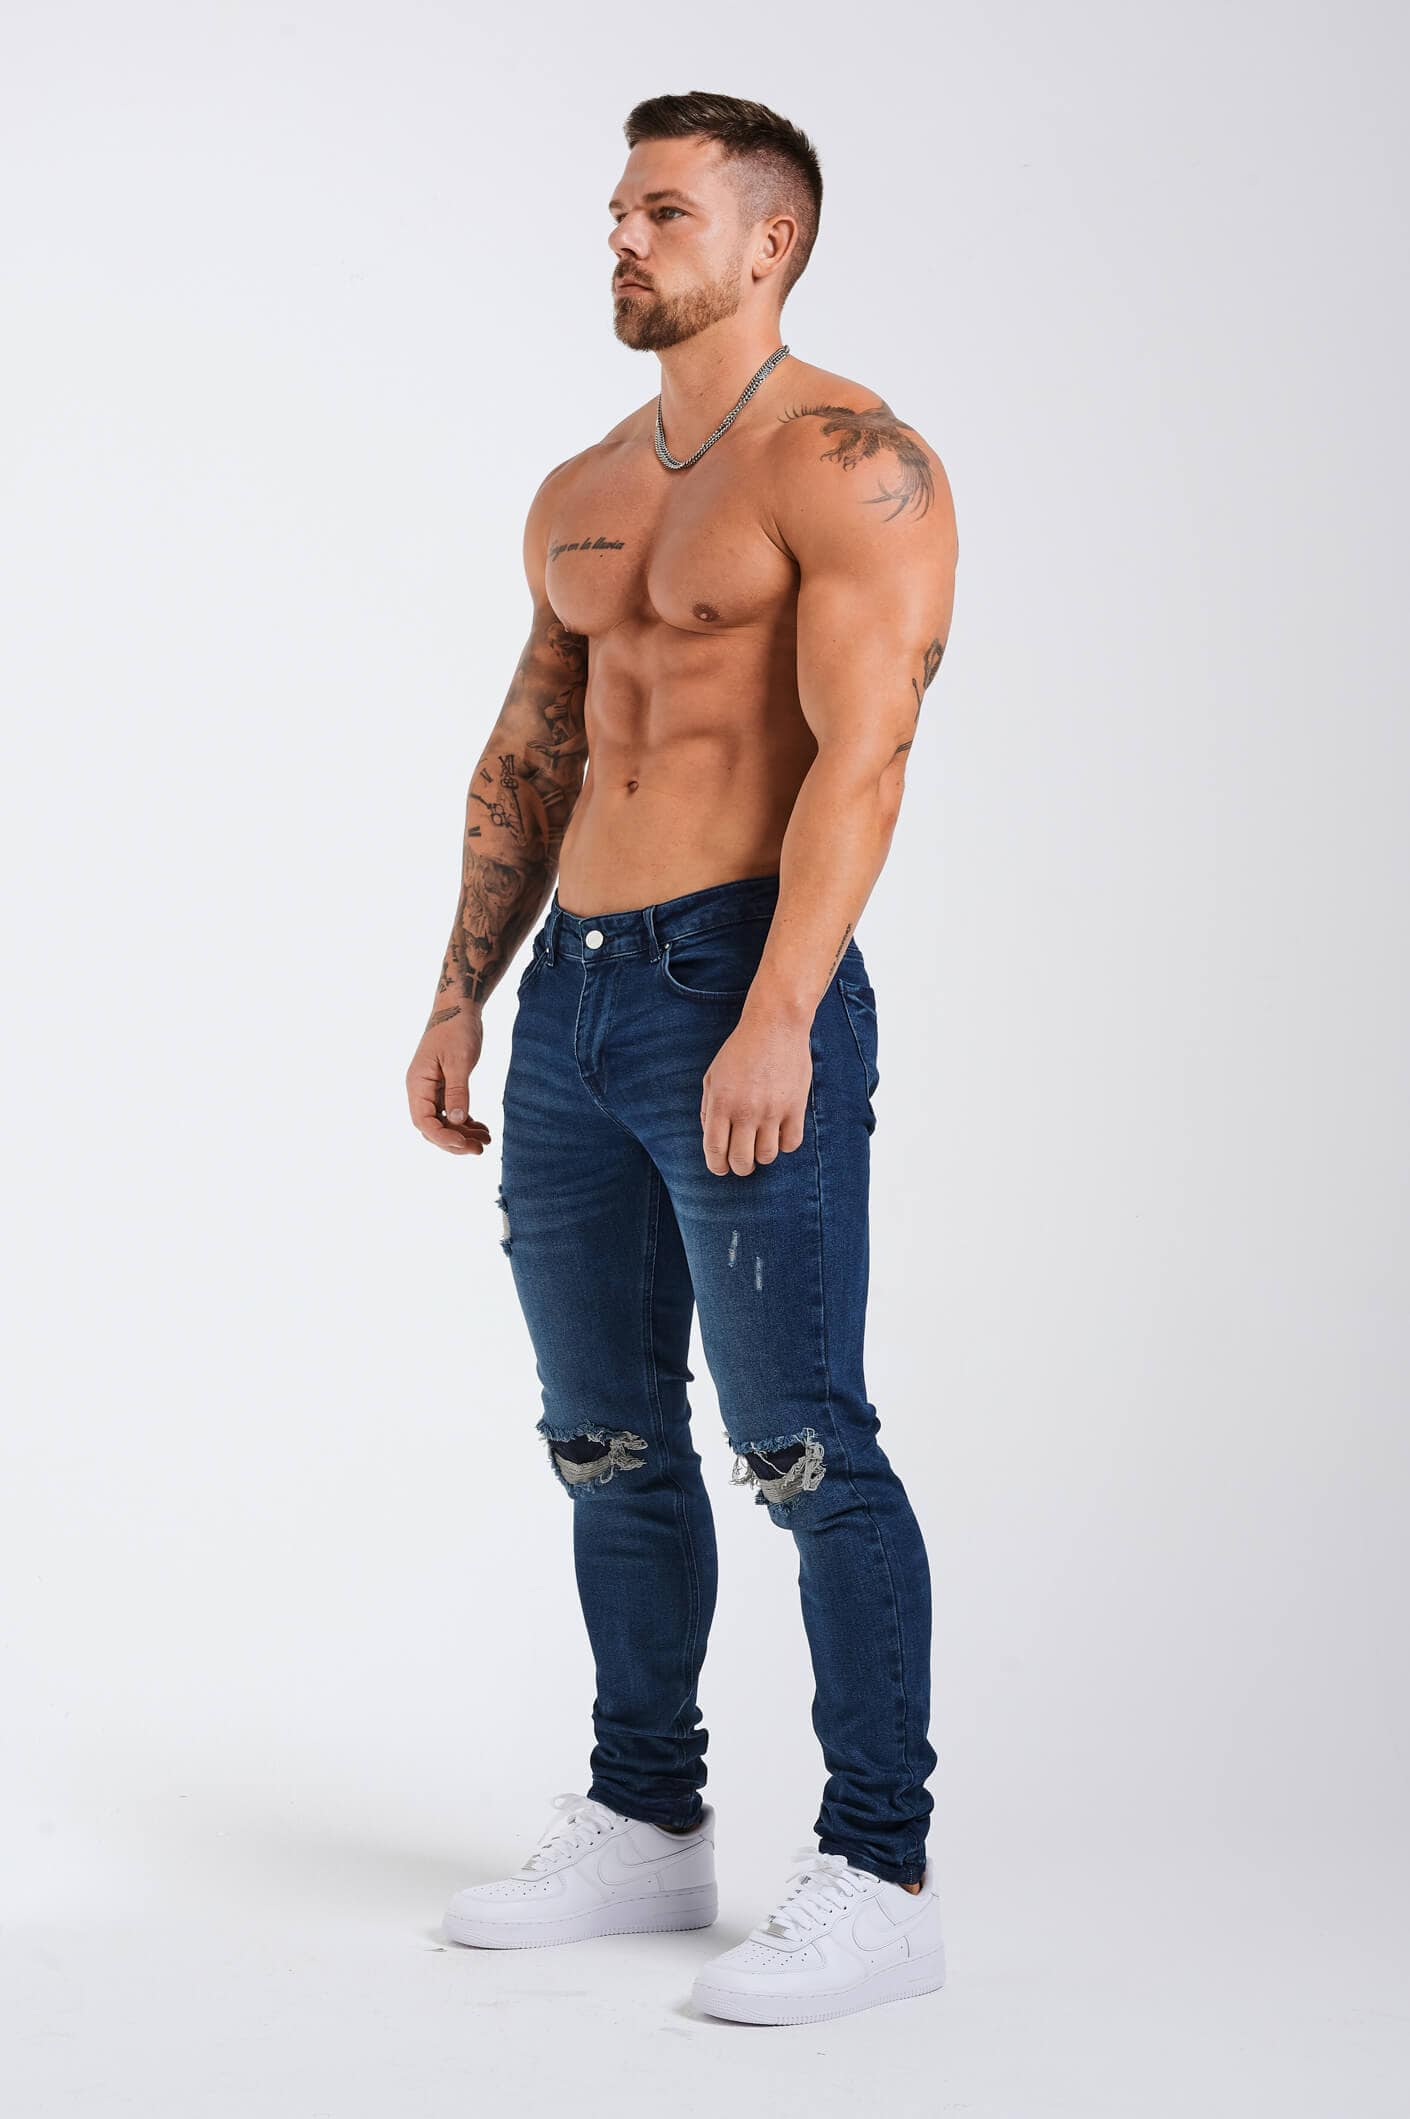 Legend London Jeans - slim 2.0 SLIM FIT JEANS 2.0 DISTRESSED AND PATCHED - DARK BLUE